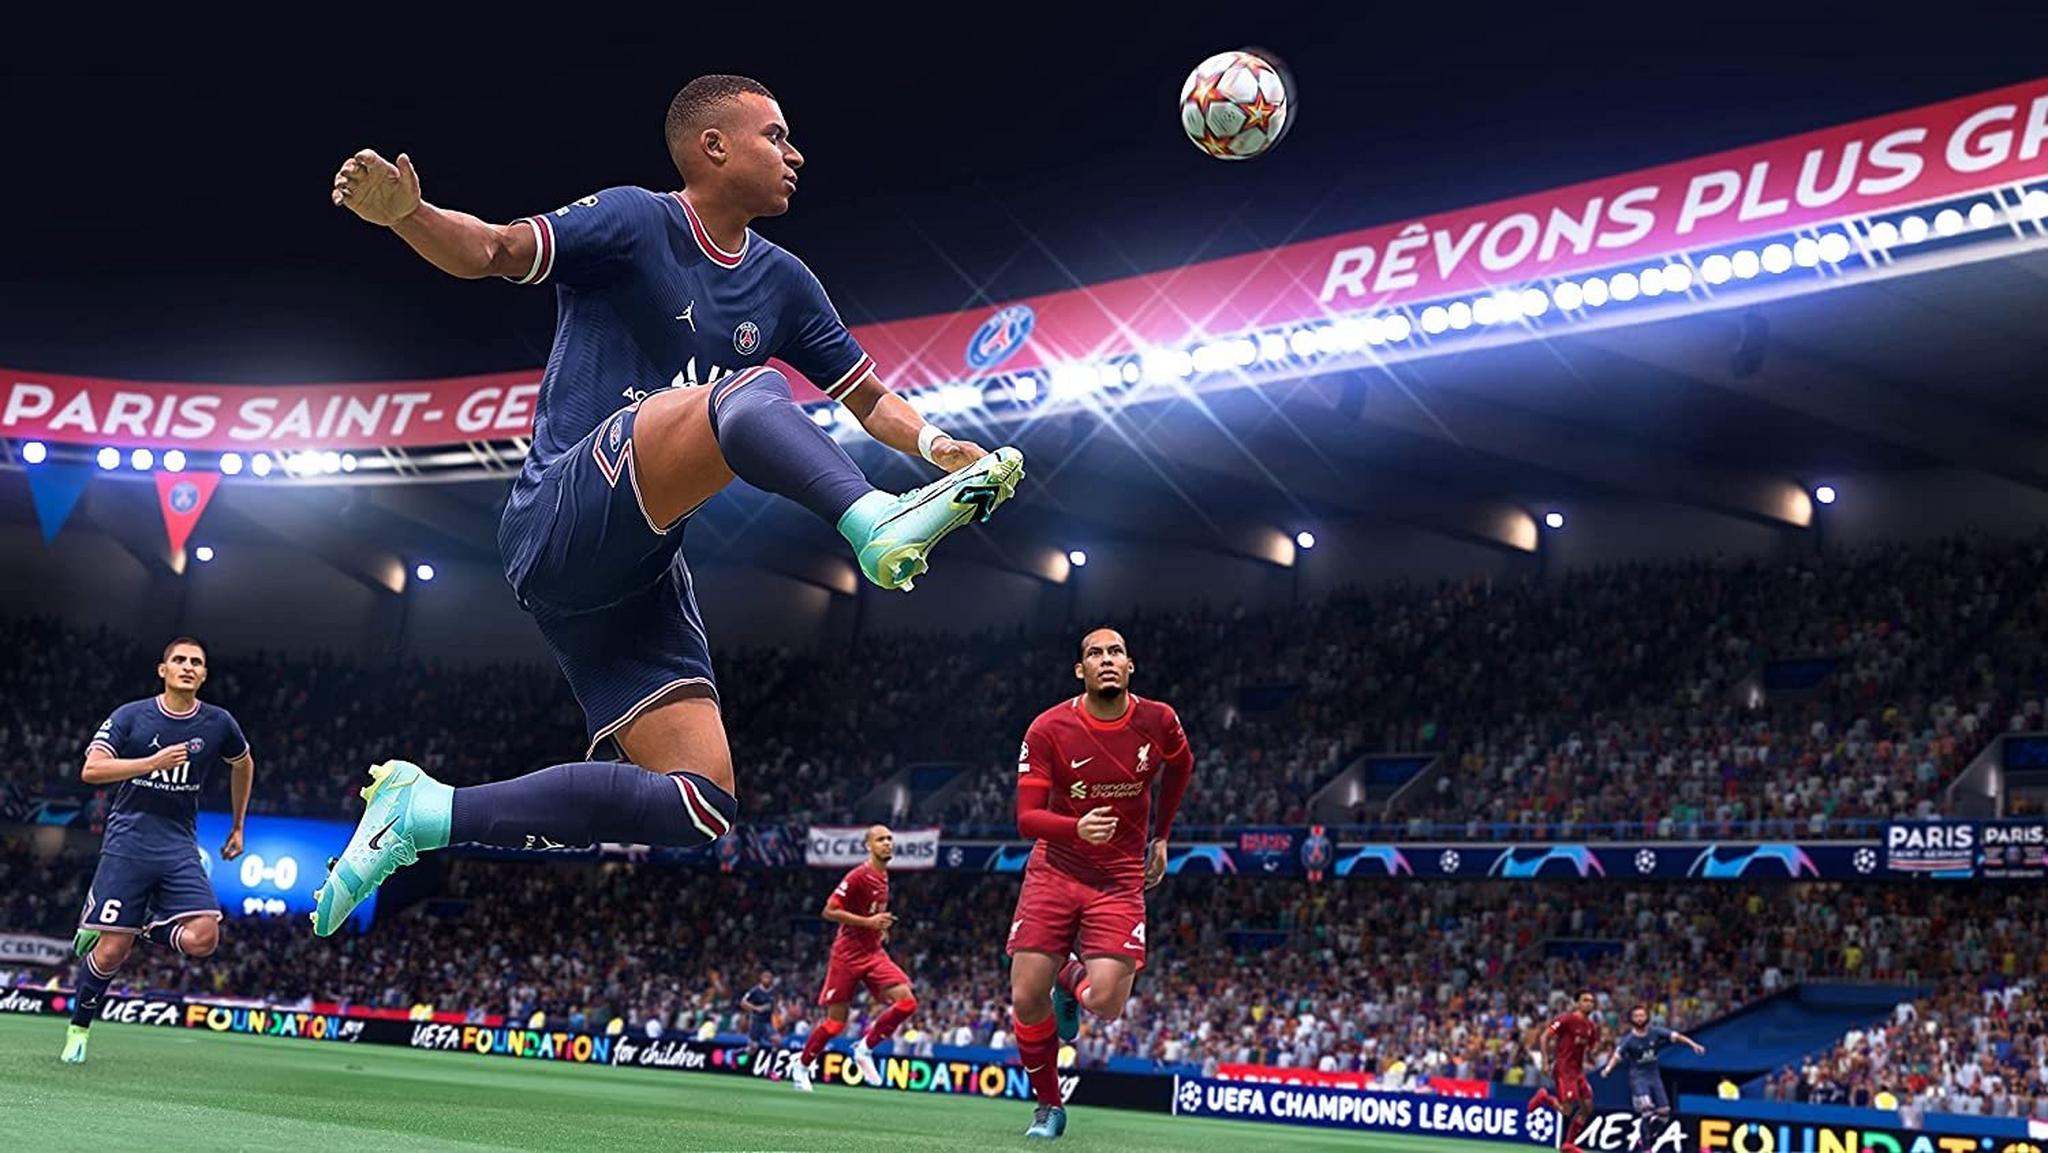 FIFA 22 Game - Standard Edition - PS4